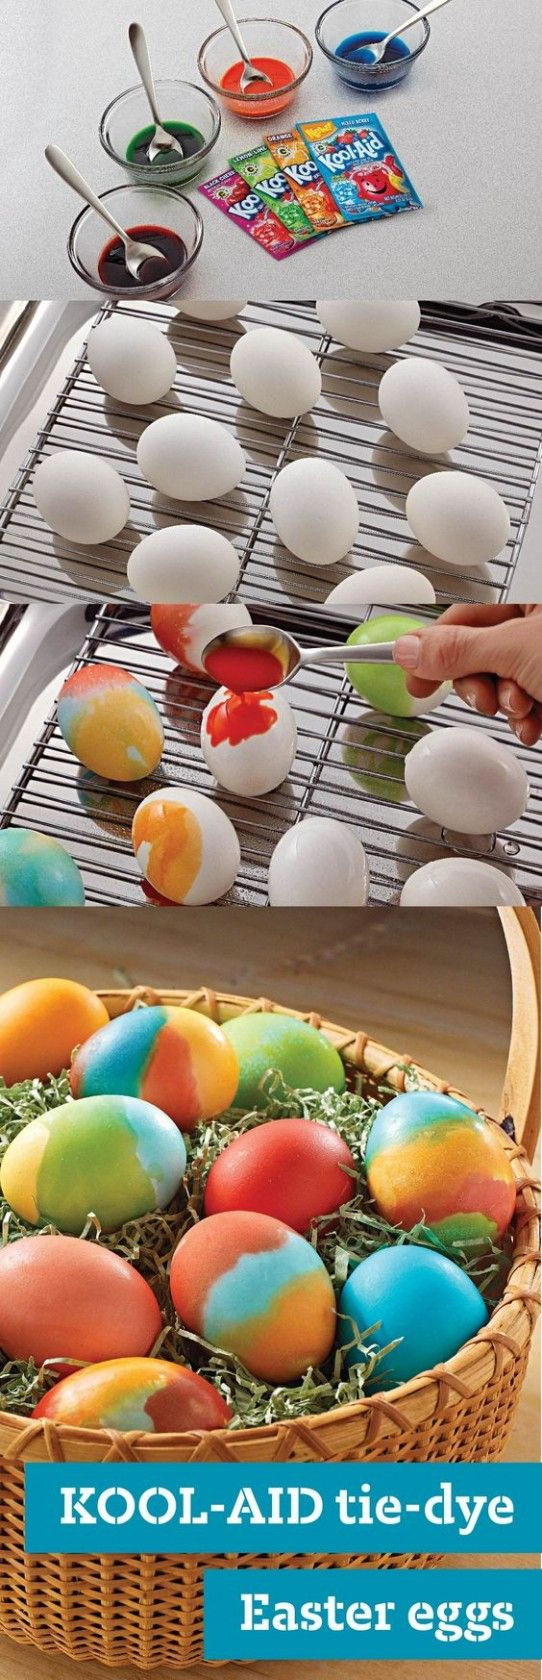 Easter Egg Dying Party Ideas
 GLOW IN THE DARK EASTER EGGS Including Other Awesome